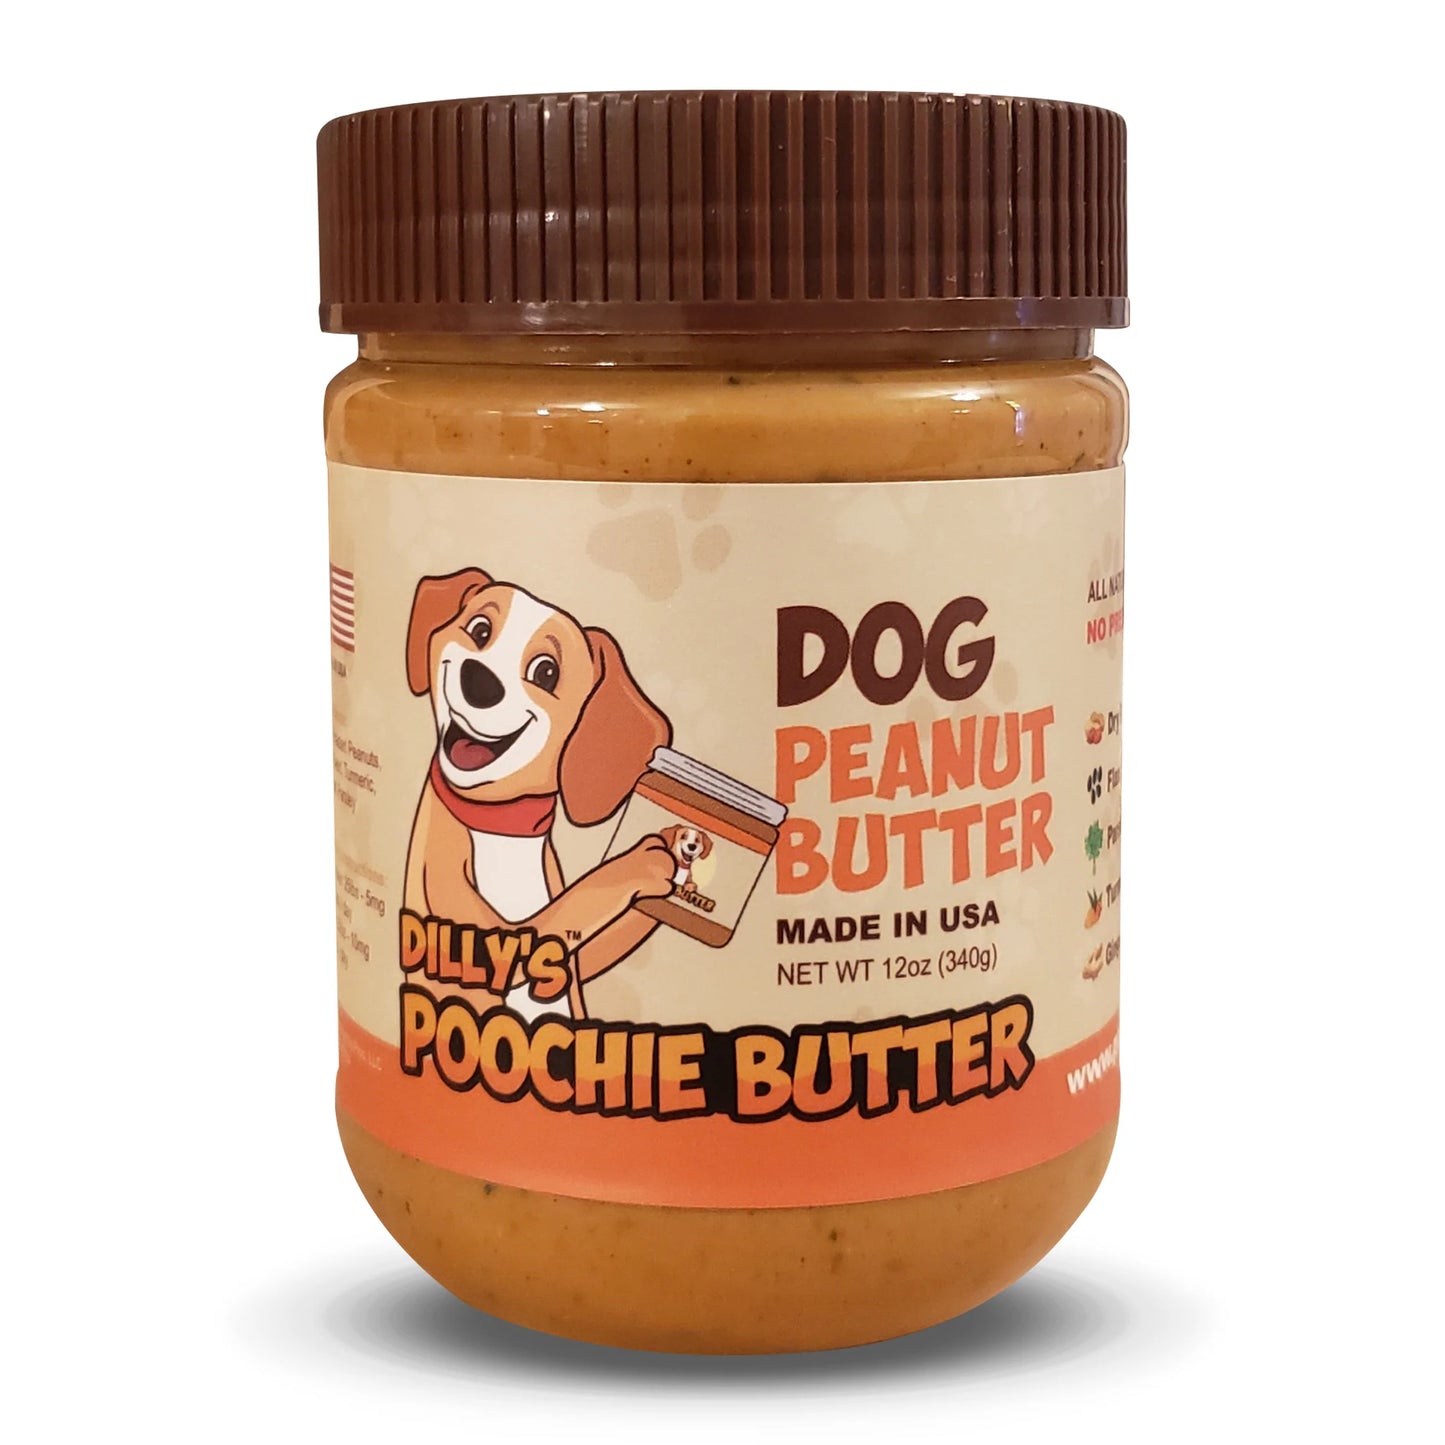 Poochie Butter 狗狗花生醬